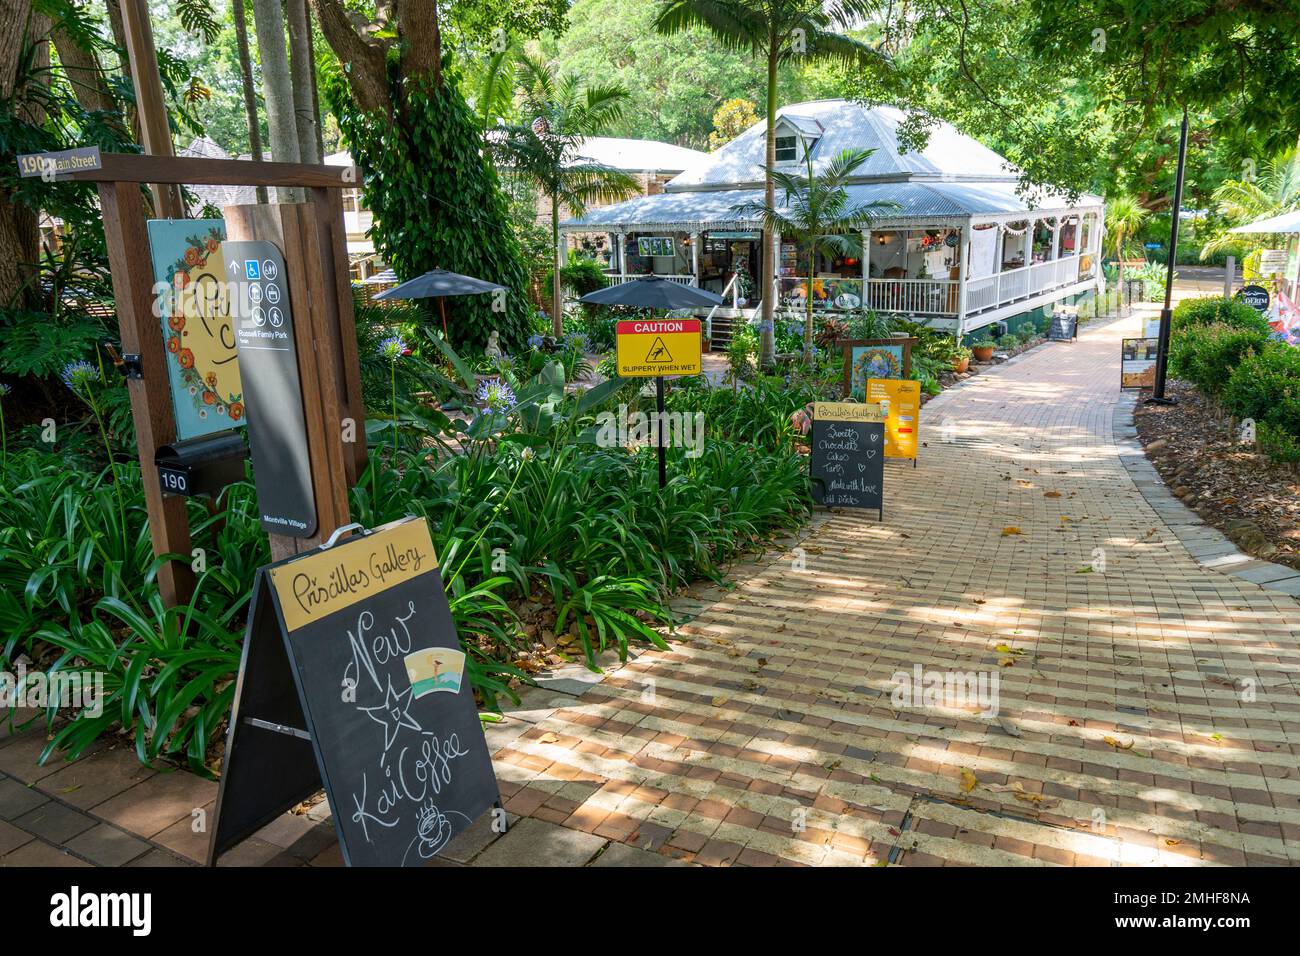 Cafe surrounded by trees in main street of Maleny, Sunshine Coast Hinterland, Queensland Australia Stock Photo